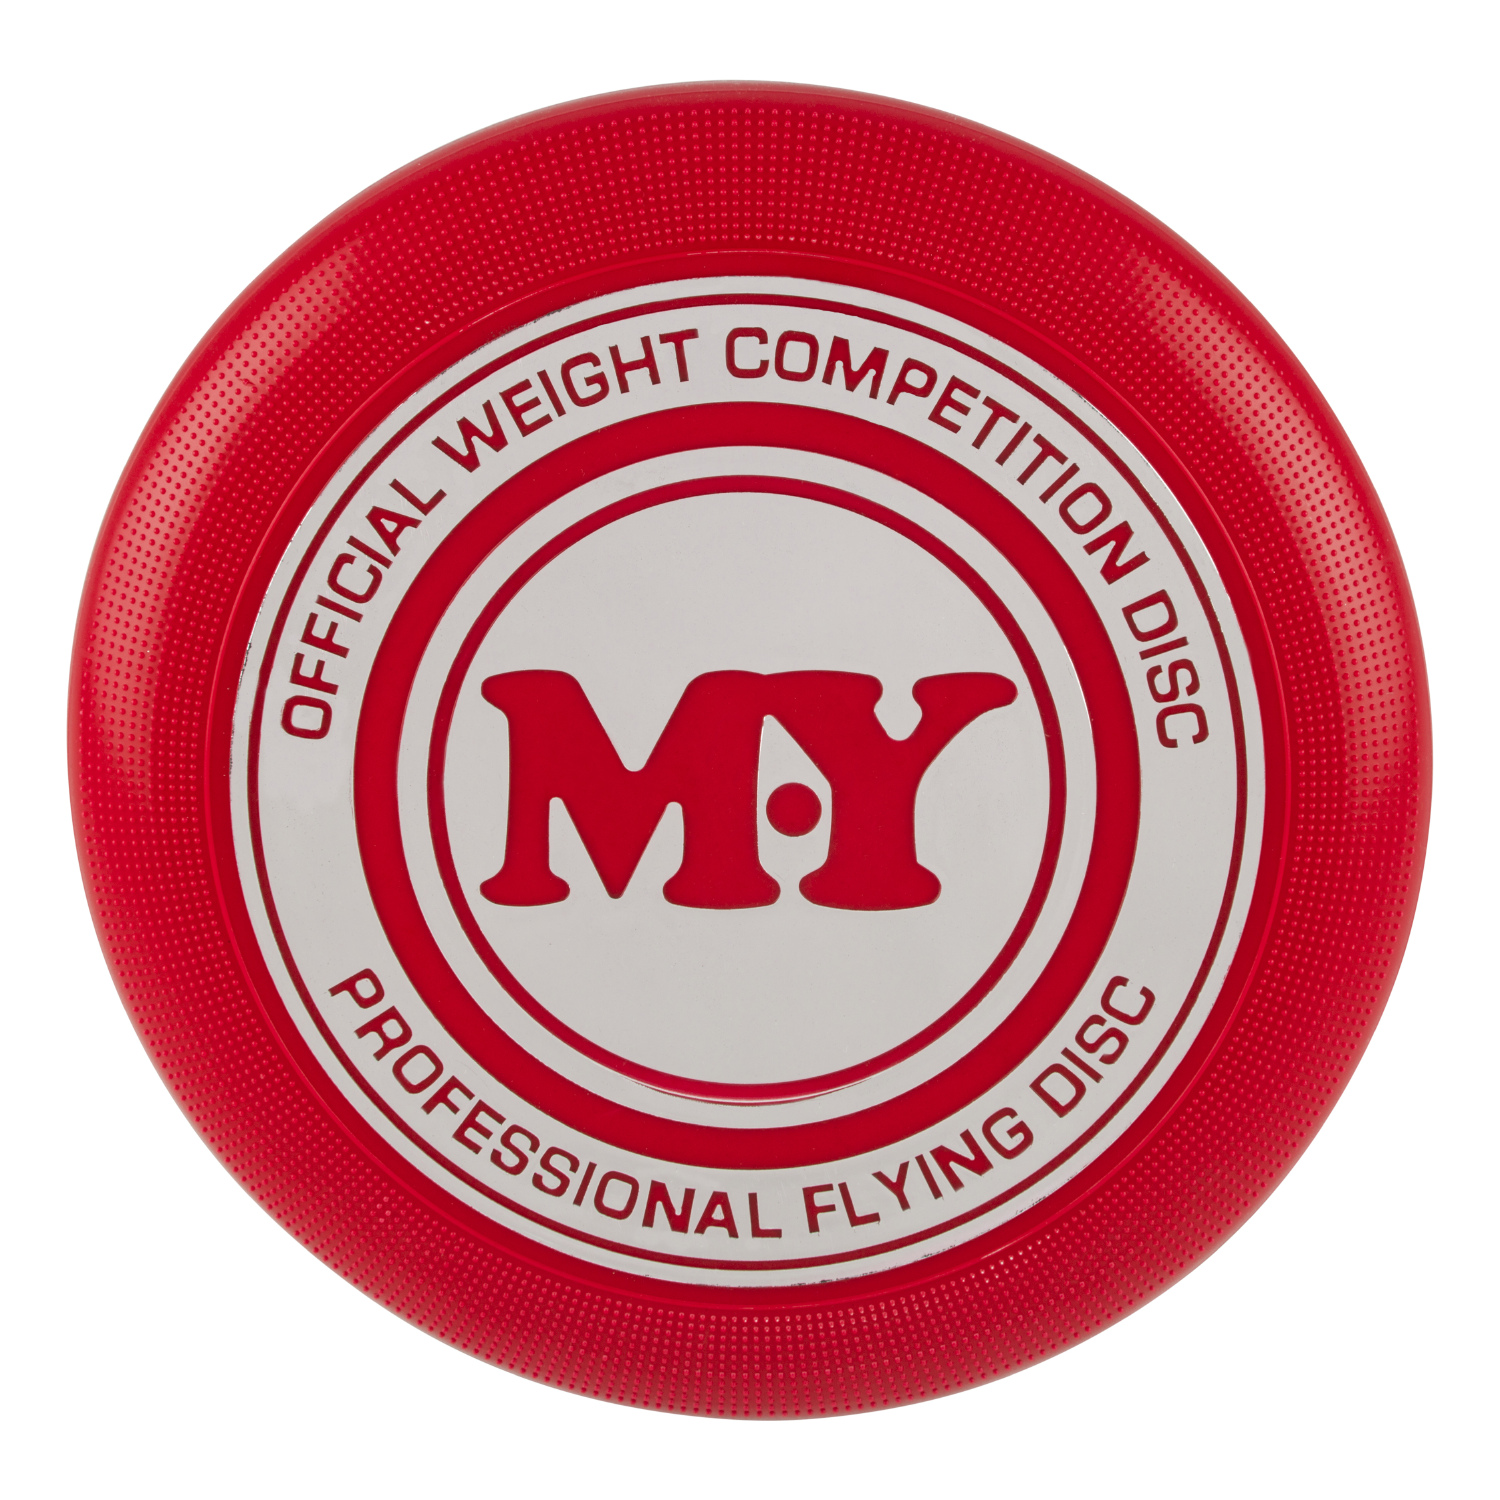 180g Professional Flying Disc Image 3